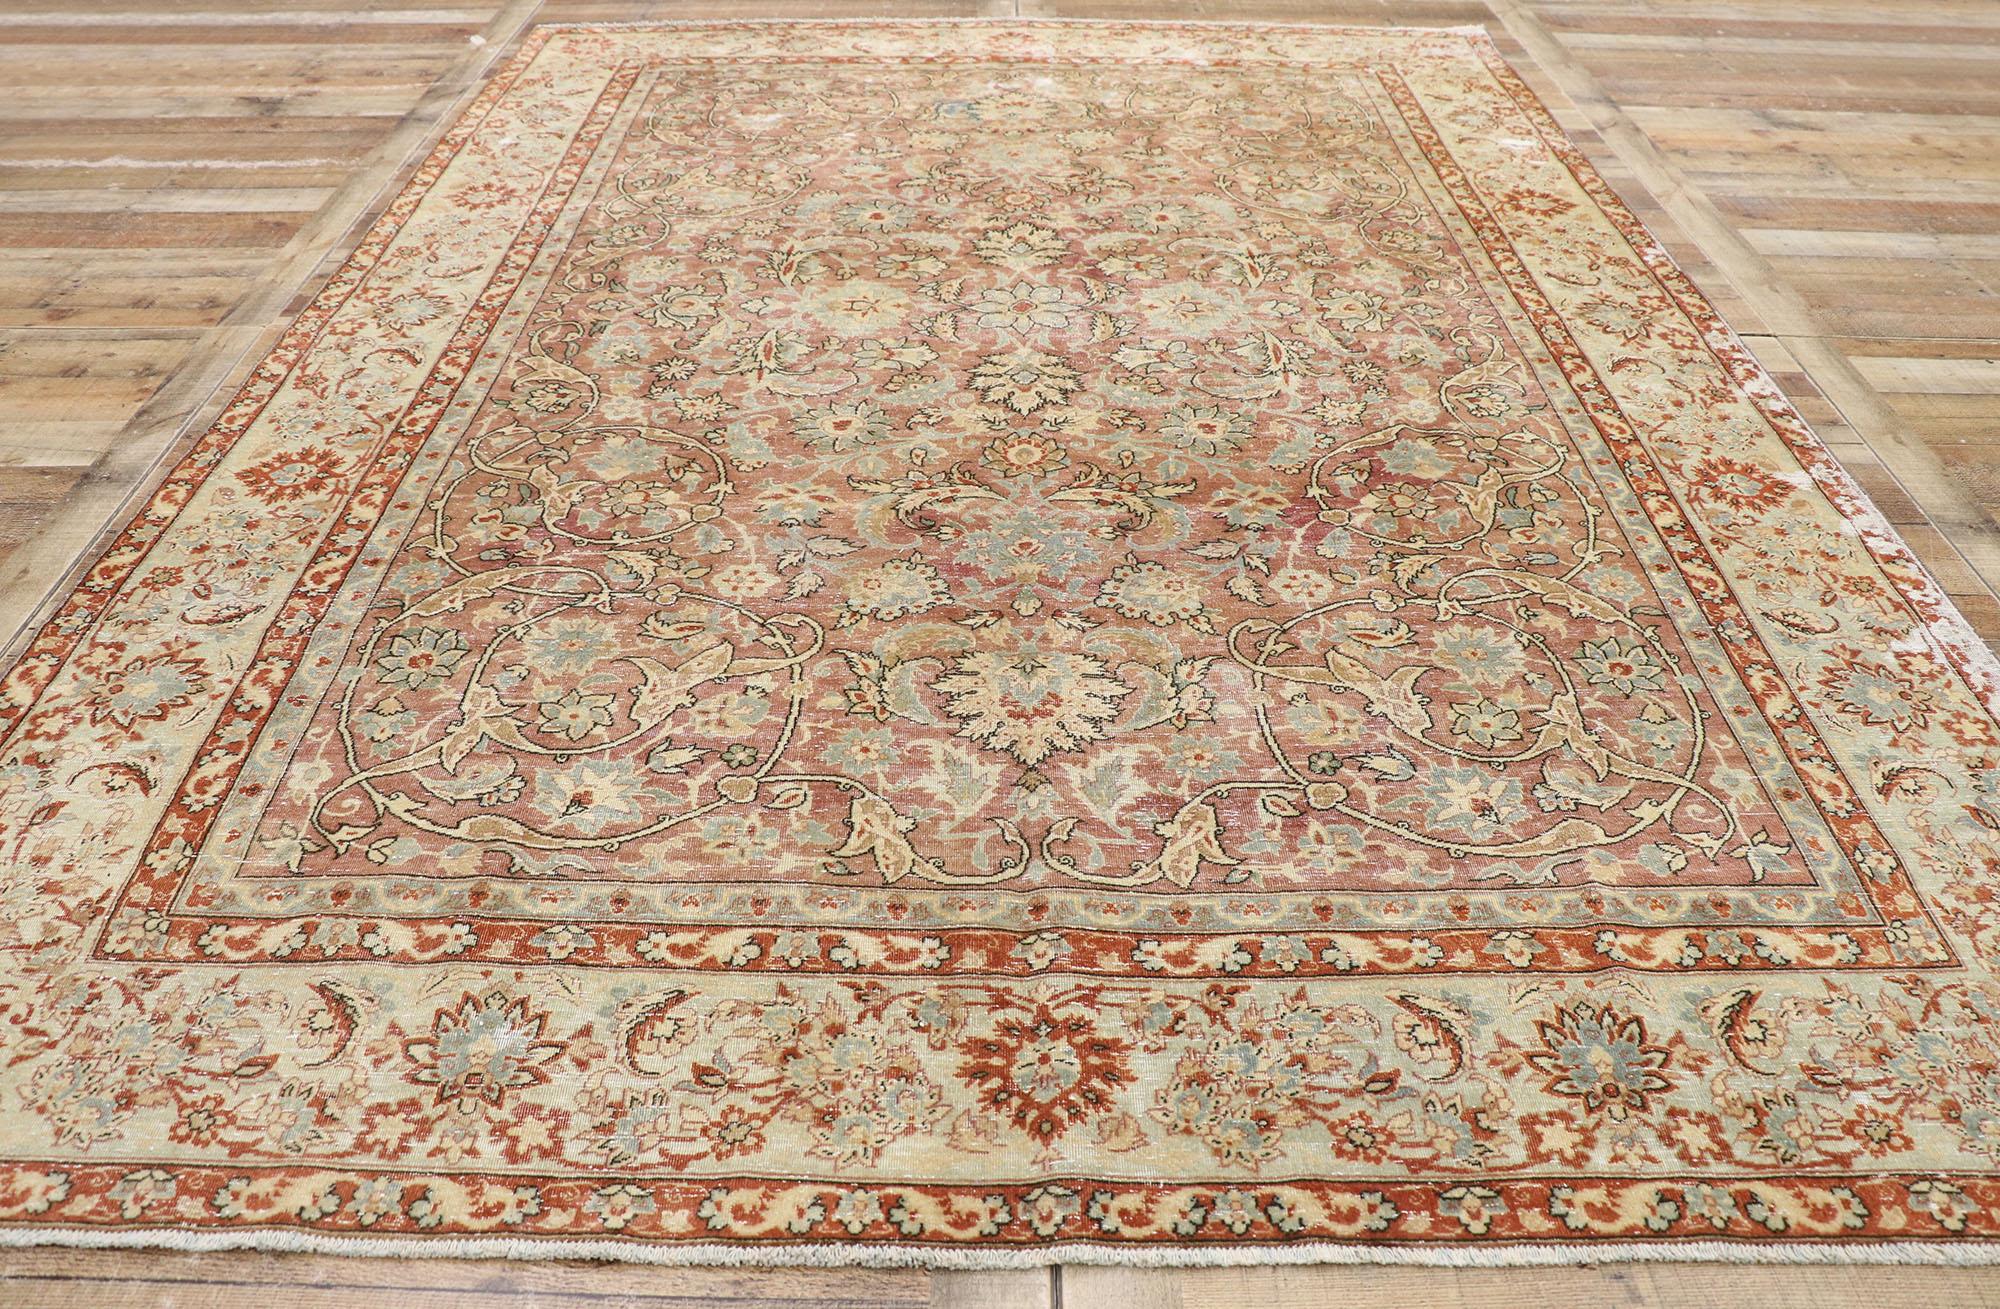 20th Century Distressed Antique Persian Tabriz Rug with Rustic Italian Tuscan Style For Sale